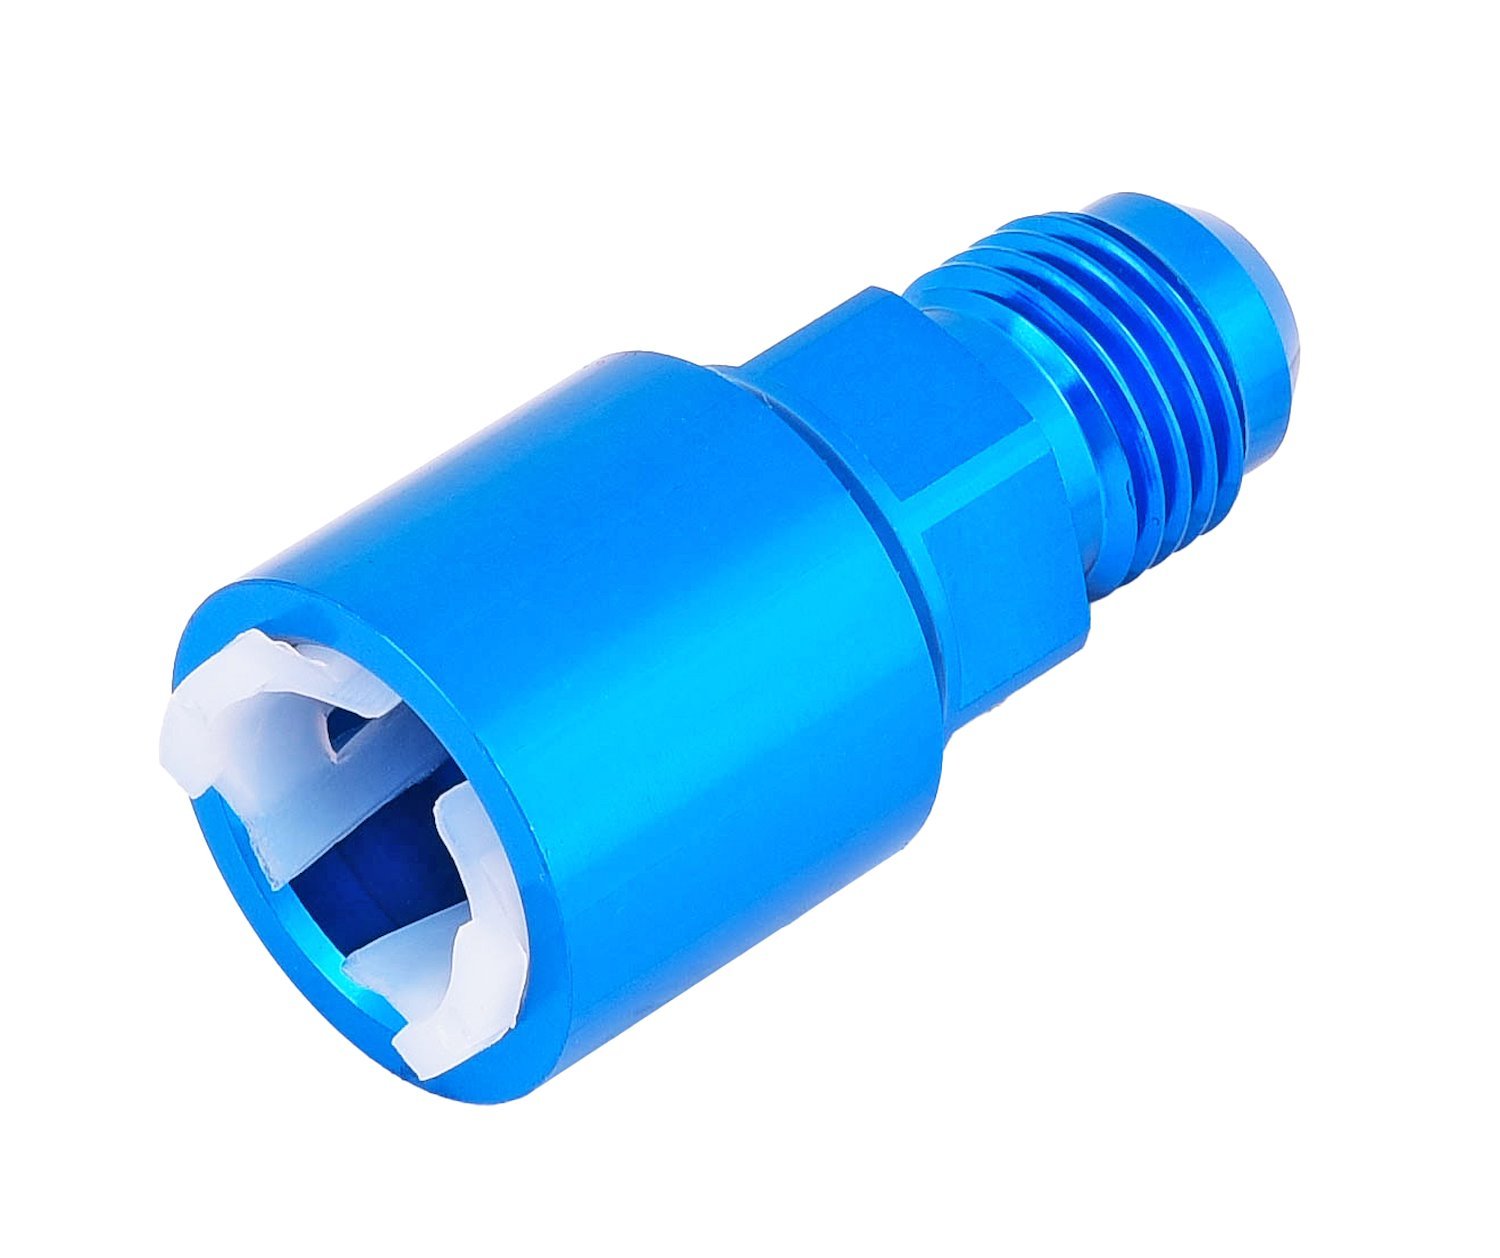 JEGS 555-108585: AN to Fuel Injection Quick-Connect Adapter Fitting, Fits  GM, Ford, and Chrysler Applications, -6 AN Male to 3/8 in. Hardline, Push-On Quick-Connection, Aluminum, Blue Anodized Finish